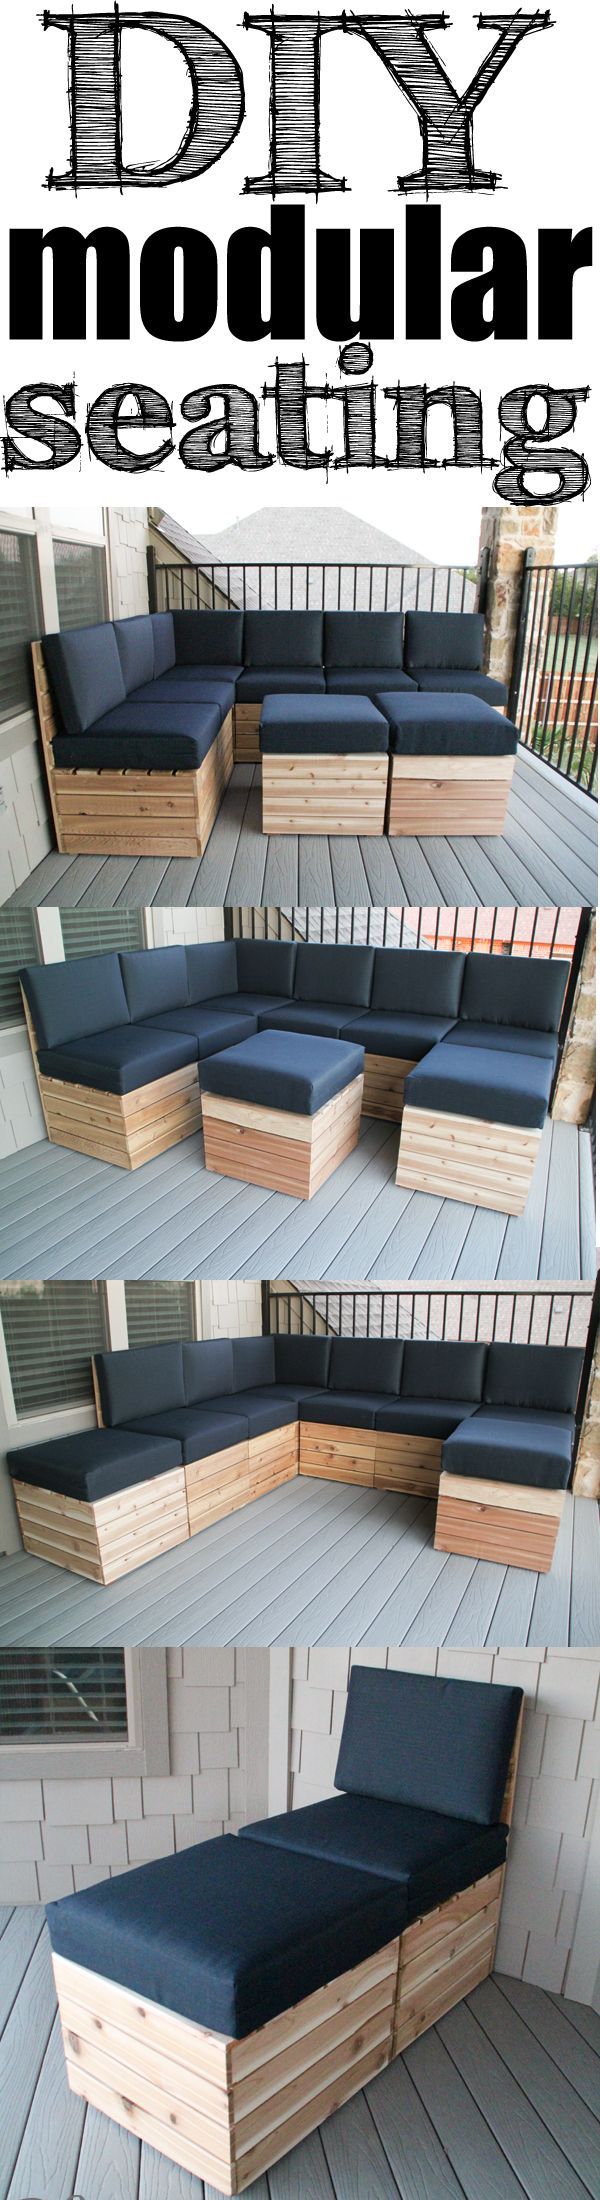 DIY Modular Seating! Easy build and you can build it/arrange it to fit your spac...